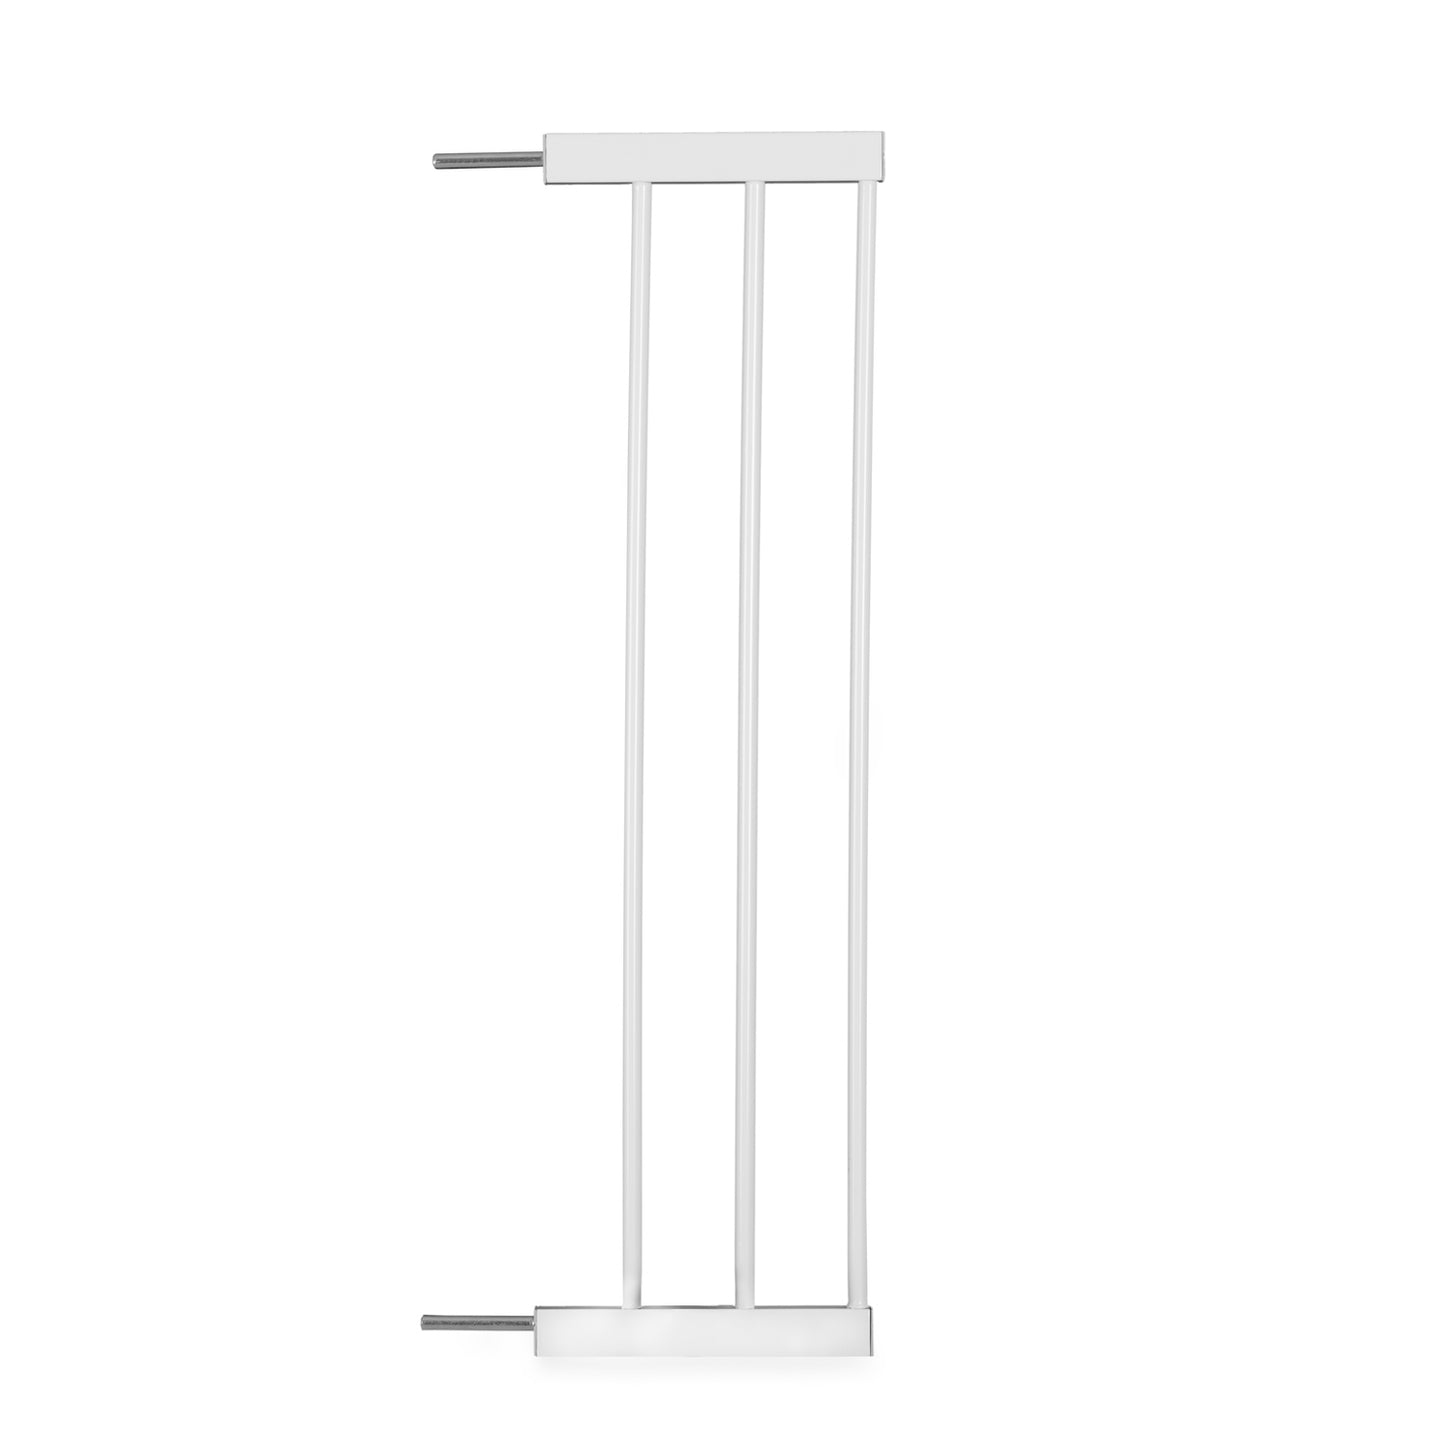 Open N Stop Safety Gate + 21cm Extension